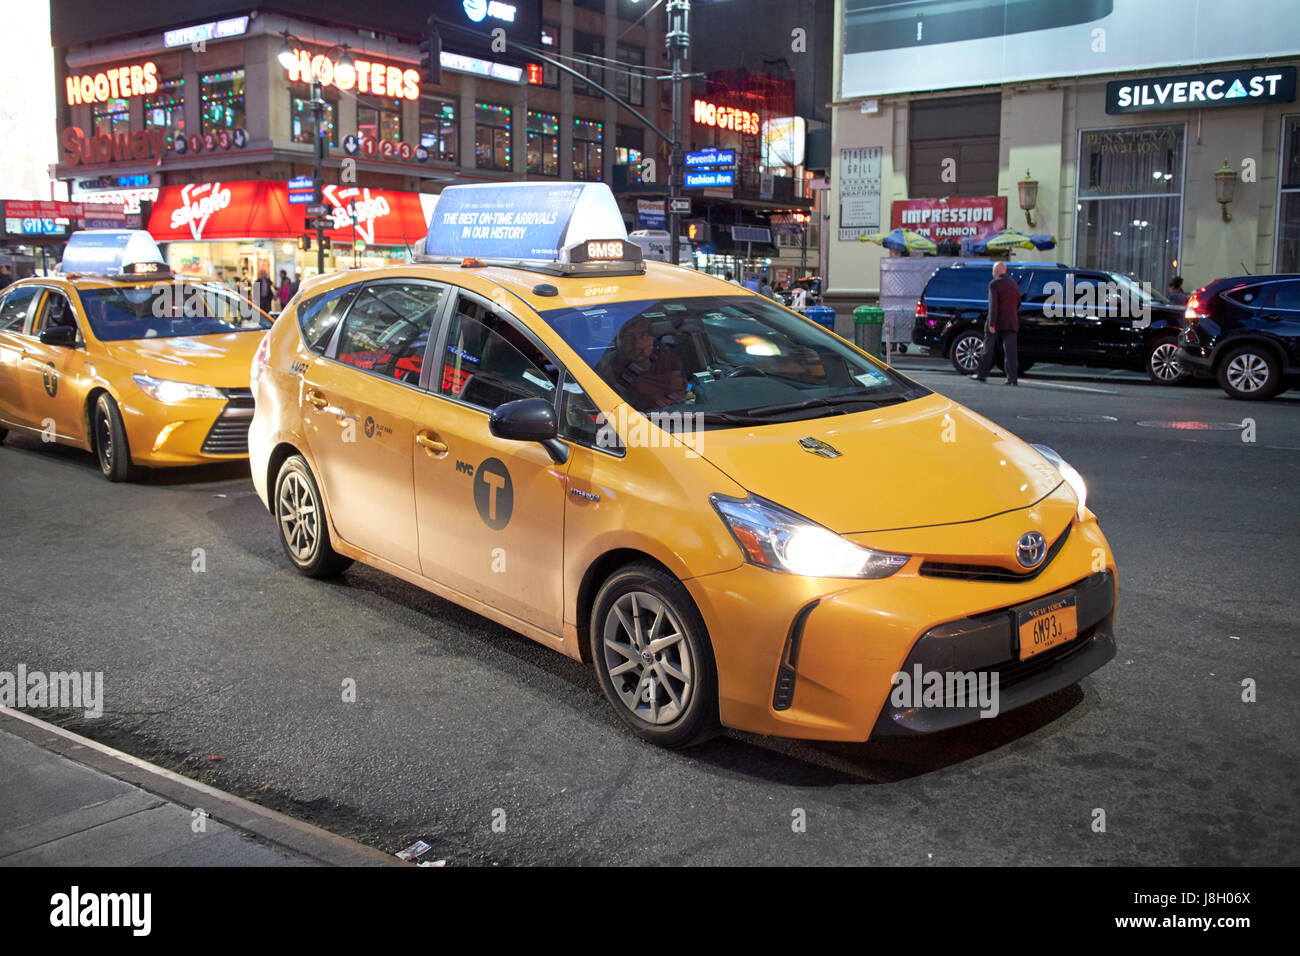 Toyota Prius ibrida v New York City yellow cab in notturna a midtown USA Foto Stock